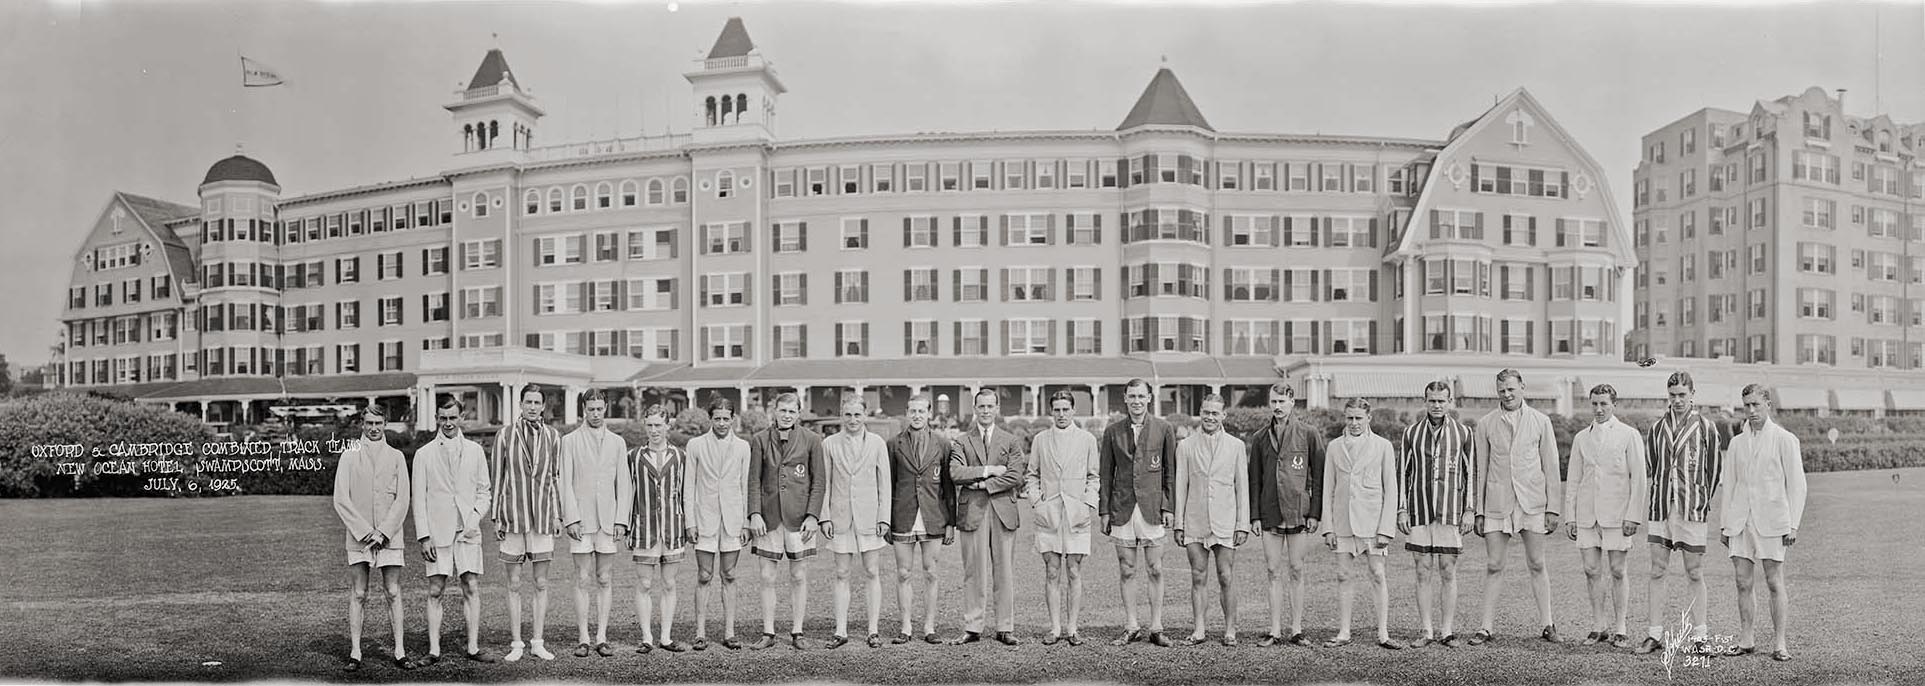 Oxford and Cambridge Combined Track Team, New Ocean House, Swampscott, MA, July 6, 1925. Photo by Fred Schutz.